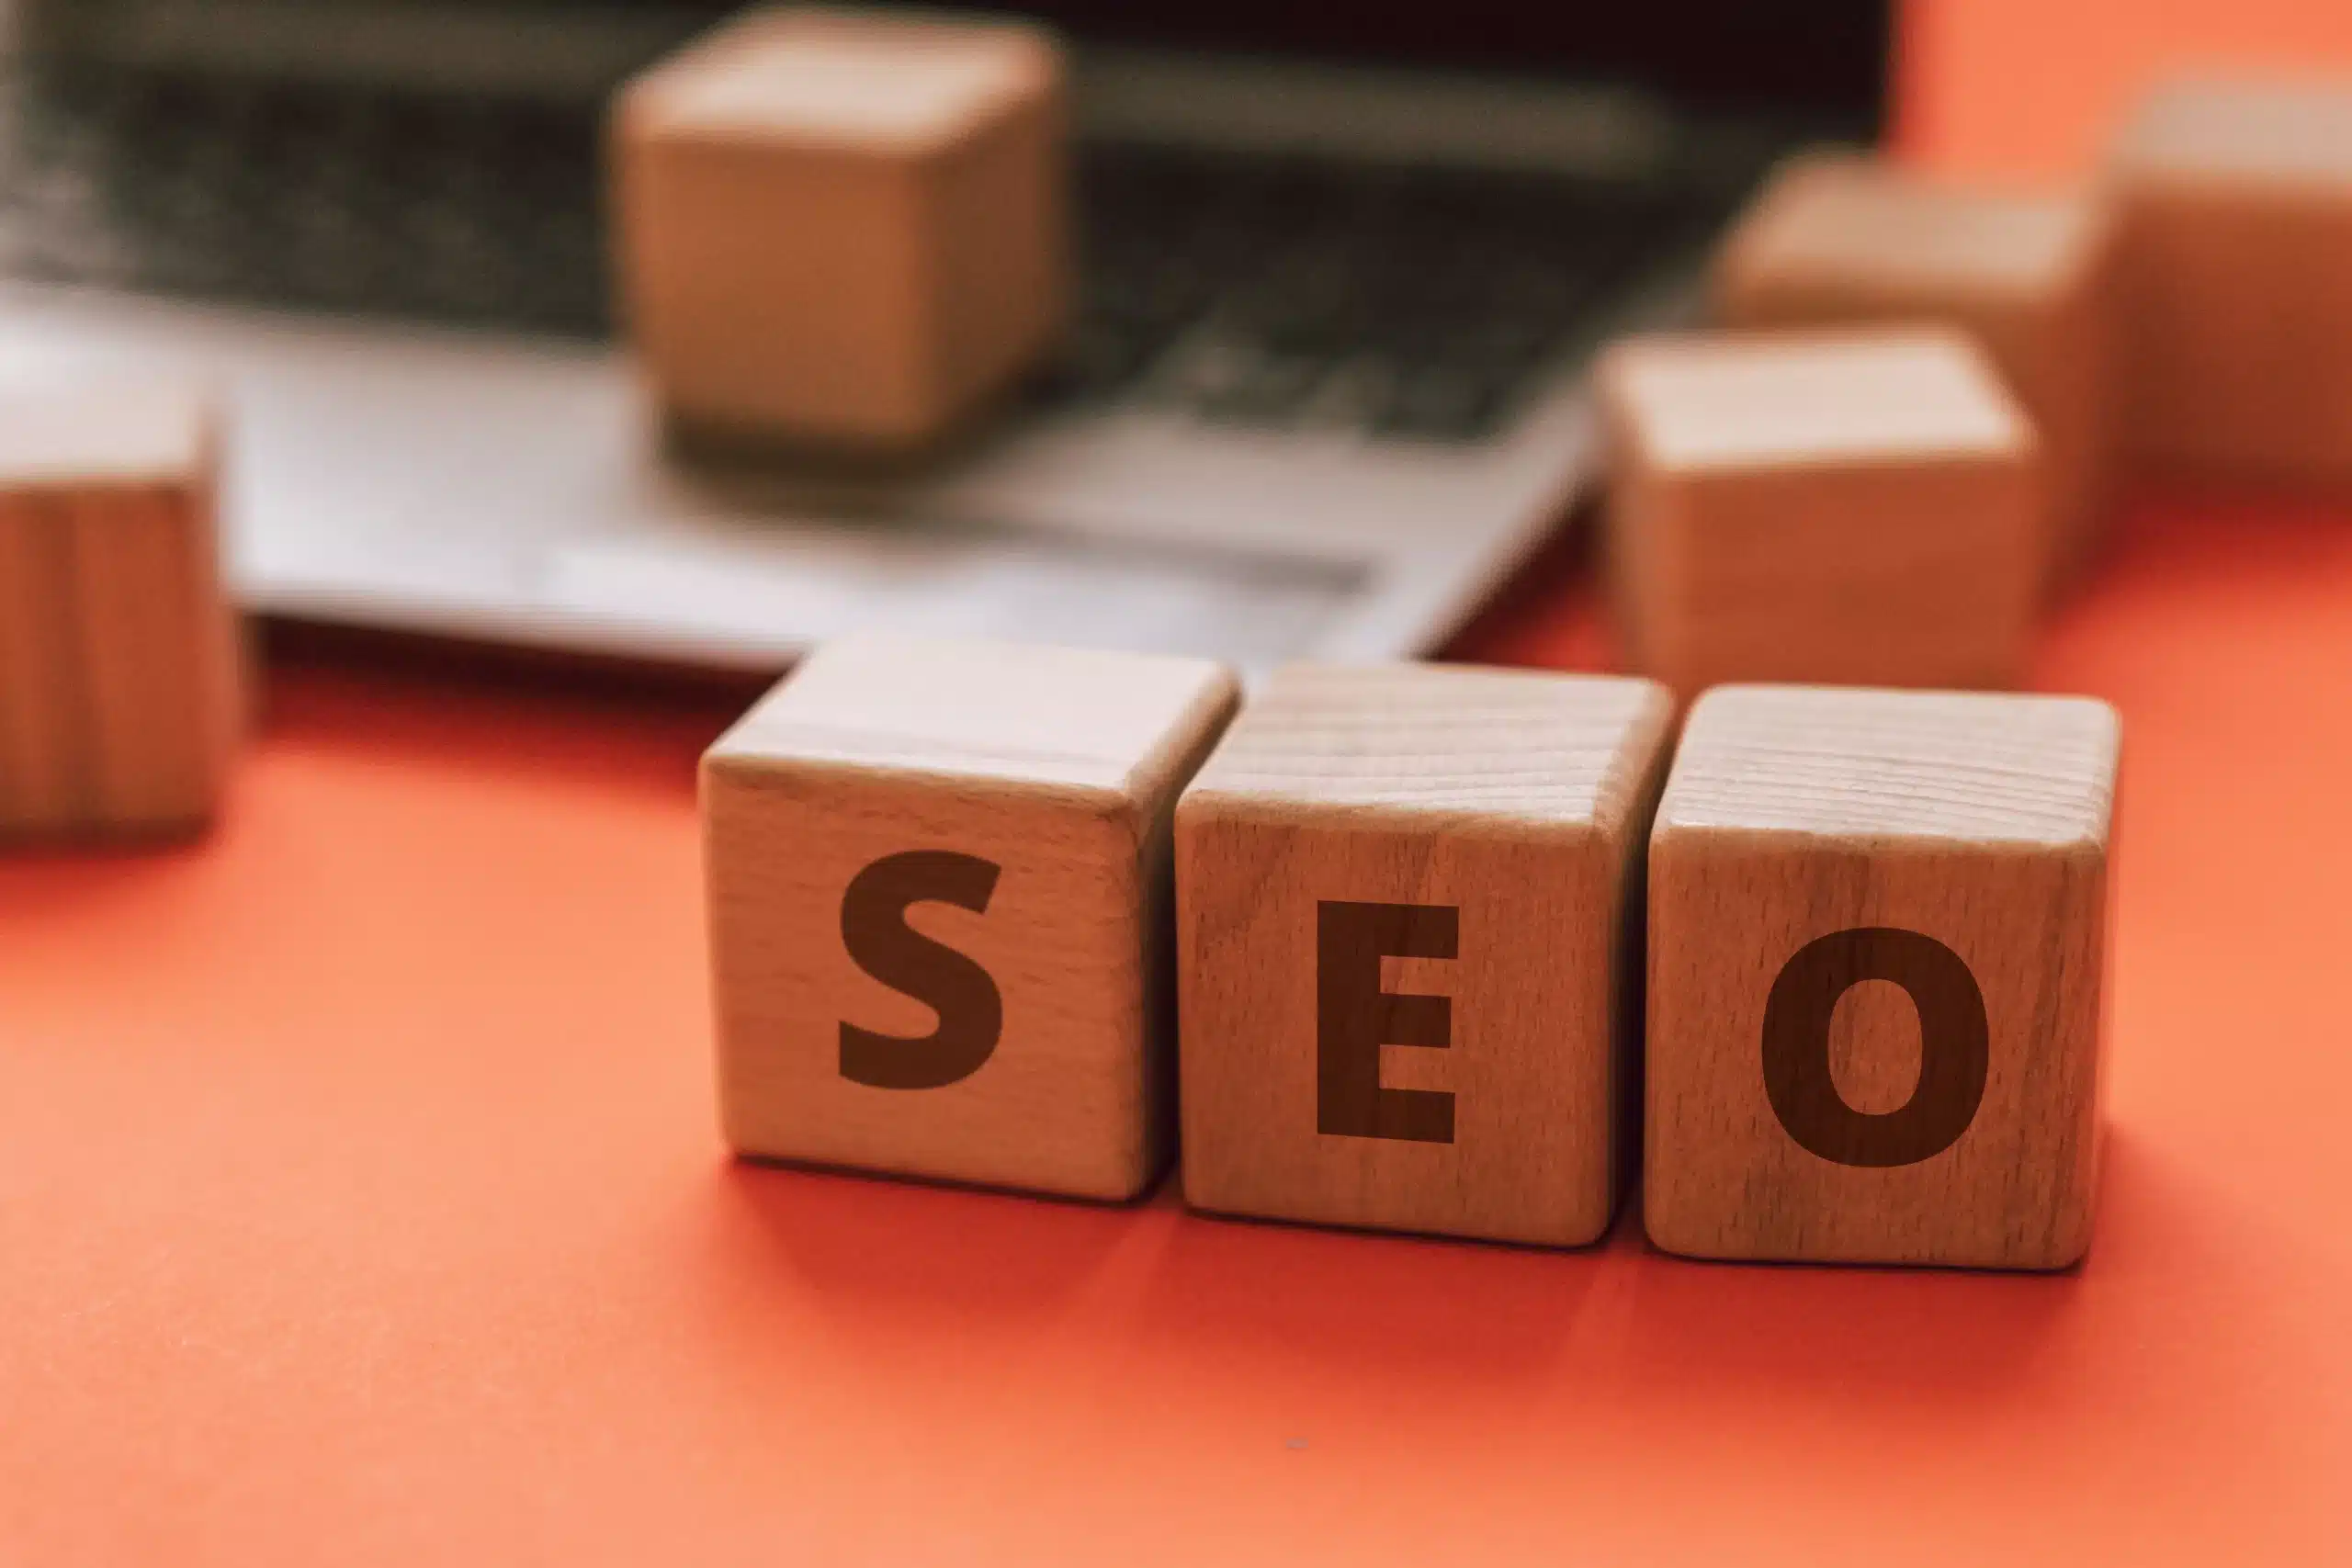 Three wooden blocks with letters 'SEO' arranged on top, symbolizing search engine optimization.